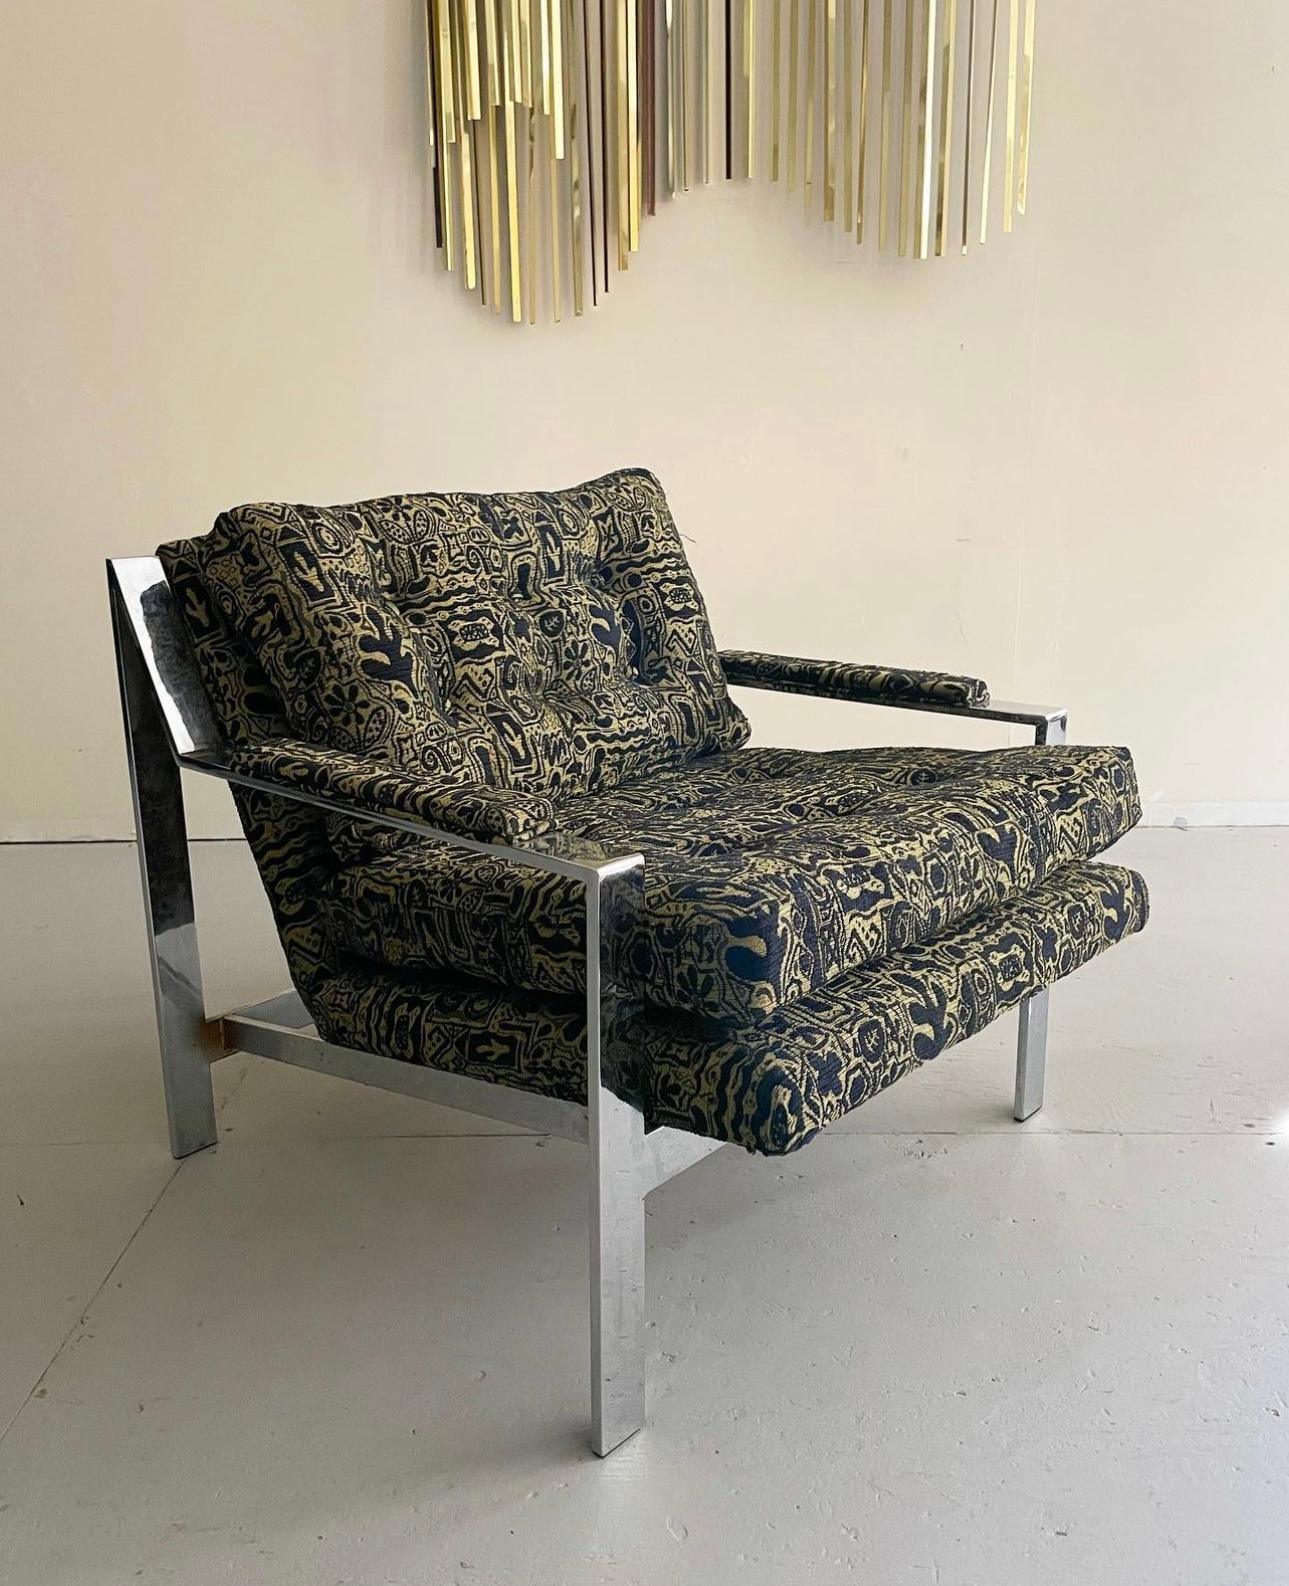 Mid-Century Modern Chrome Cube Lounge Chair Designed by Cy Mann. This chair features a mirrored chrome finish with a unique brand new geometric upholstery & foam. Designed by Cy Mann circa 1960. A perfect addition to any modern living space.